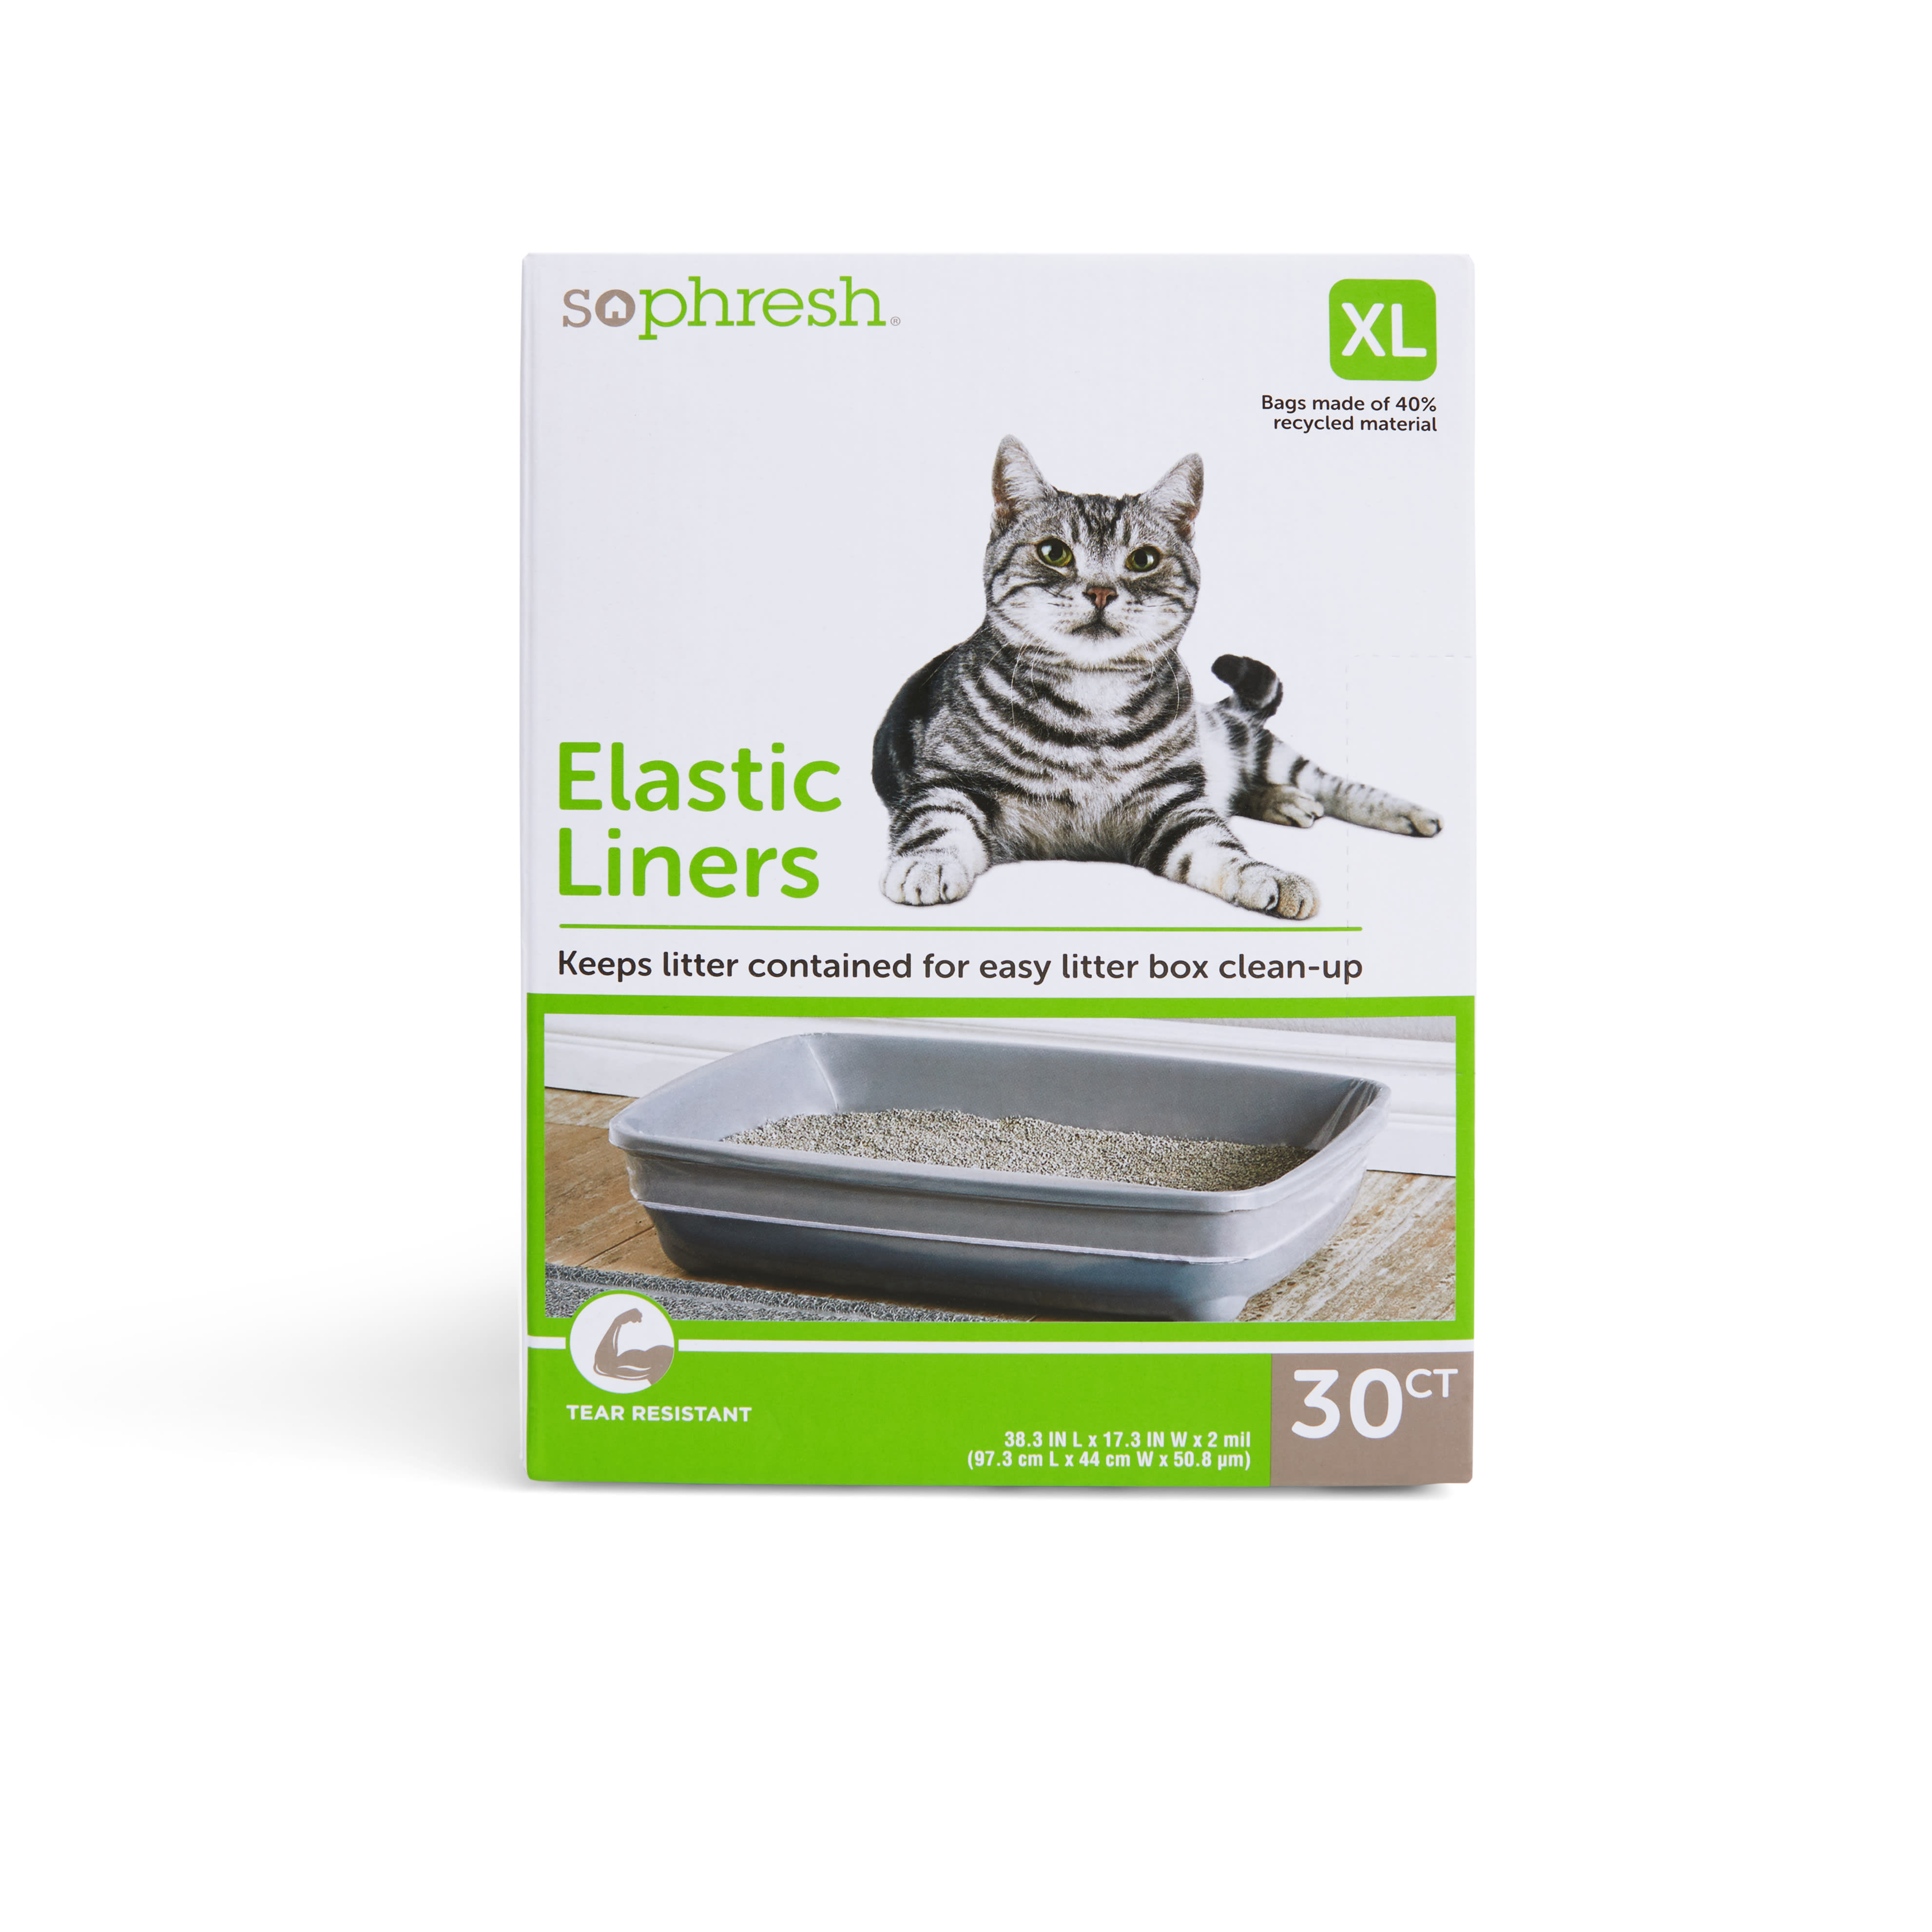 So Phresh Elastic Litter Liners for Cats, 38.3" L X 17.3" W, Count of